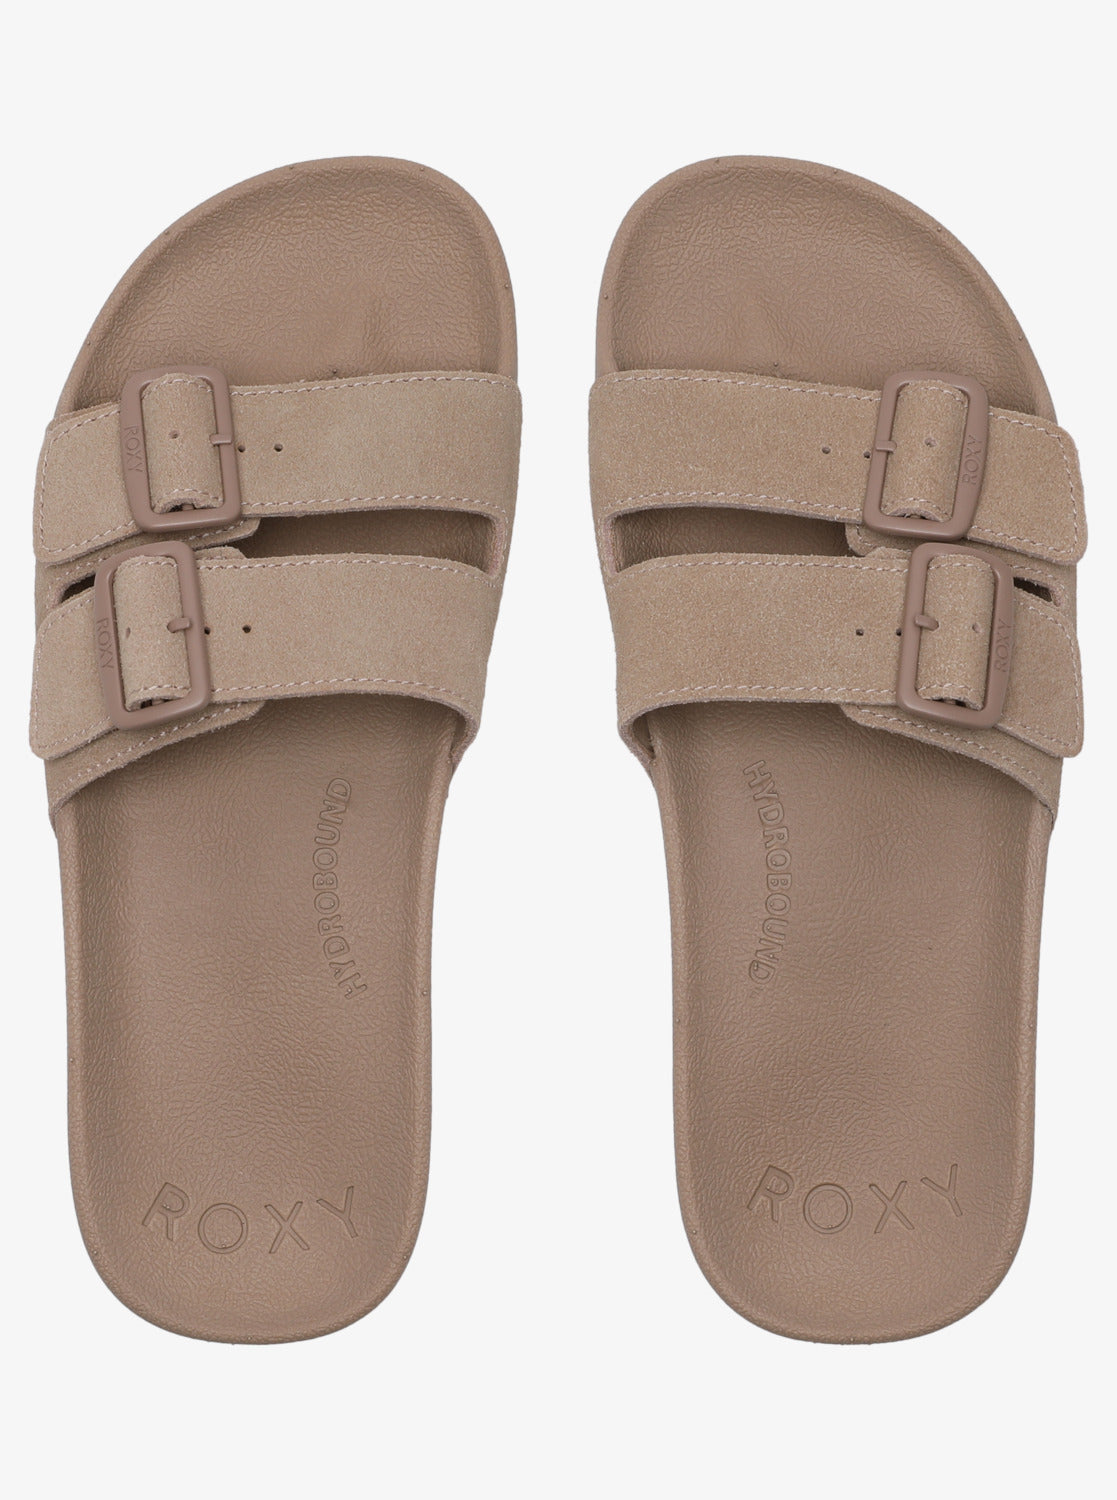 Pair of Roxy Slippy Nina Slides in taupe side by side